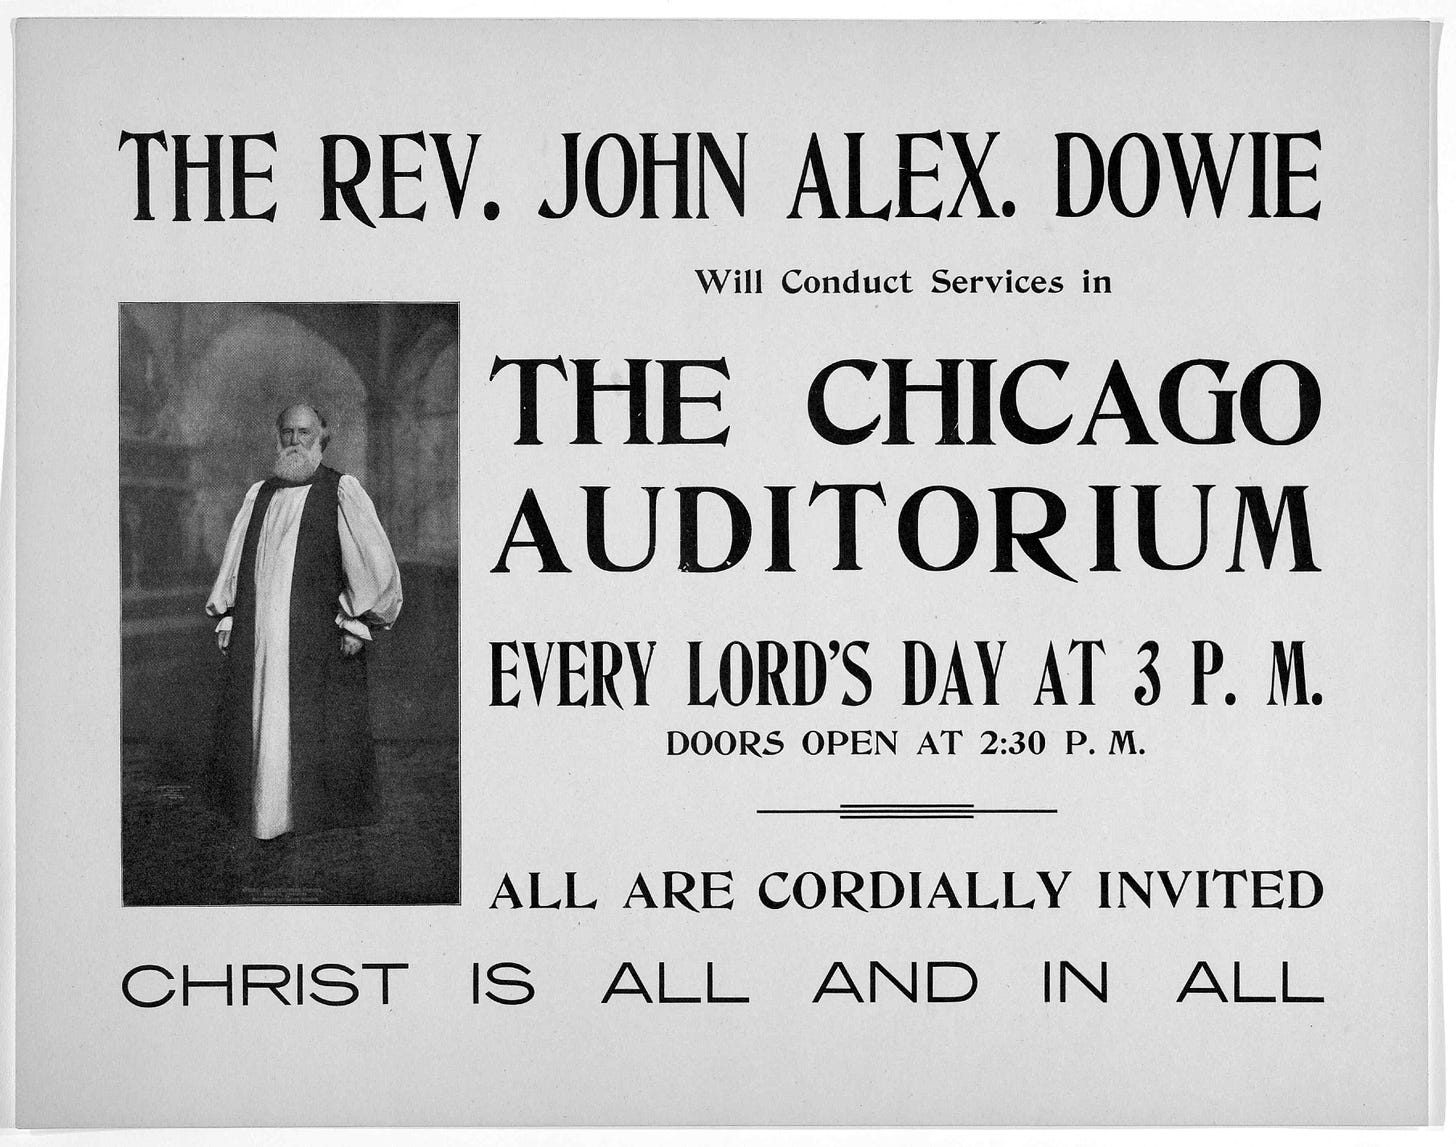 An advertisement for John Dowie's sermons in Chicago, 1900.